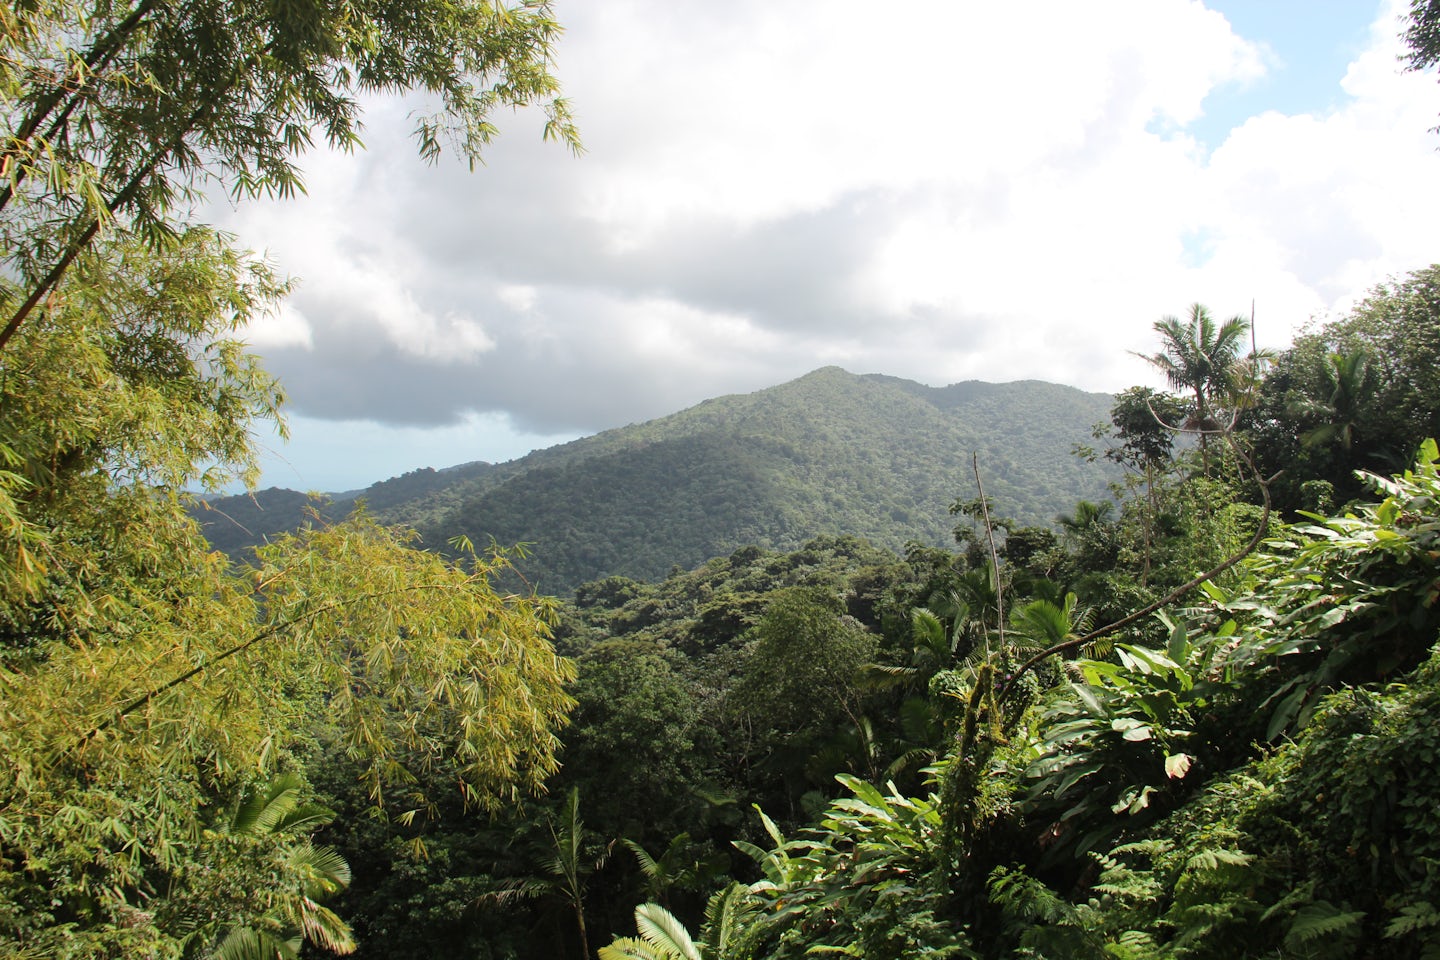 View from the Rainforest